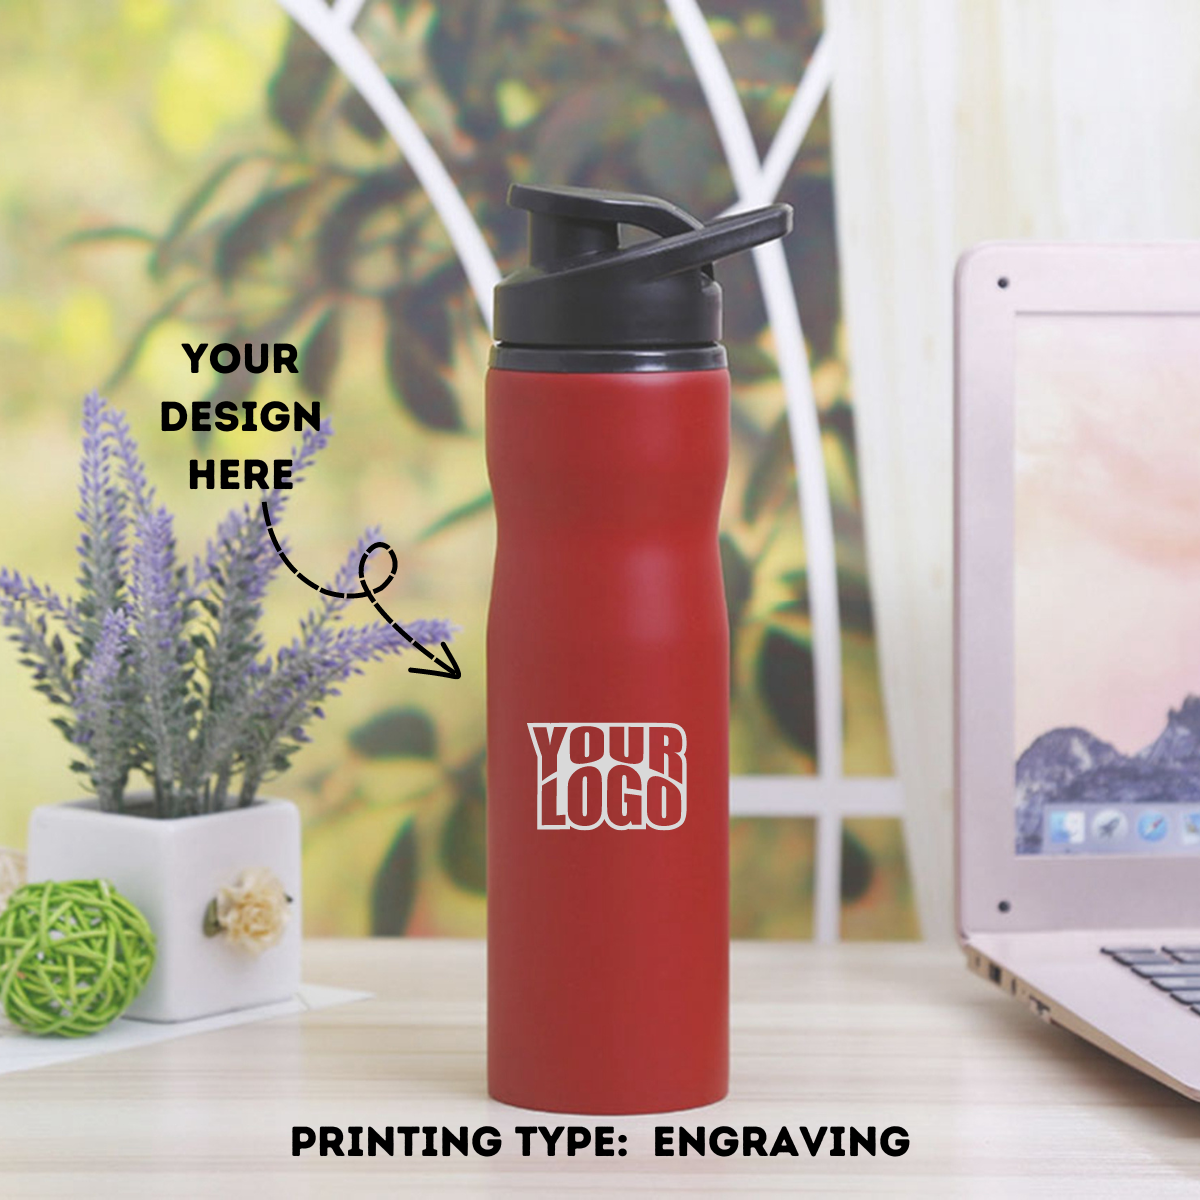 Red Steel Sports Sipper Water Bottle Laser Engraved - 750ml - For Return Gift, Corporate Gifting, Office or Personal Use